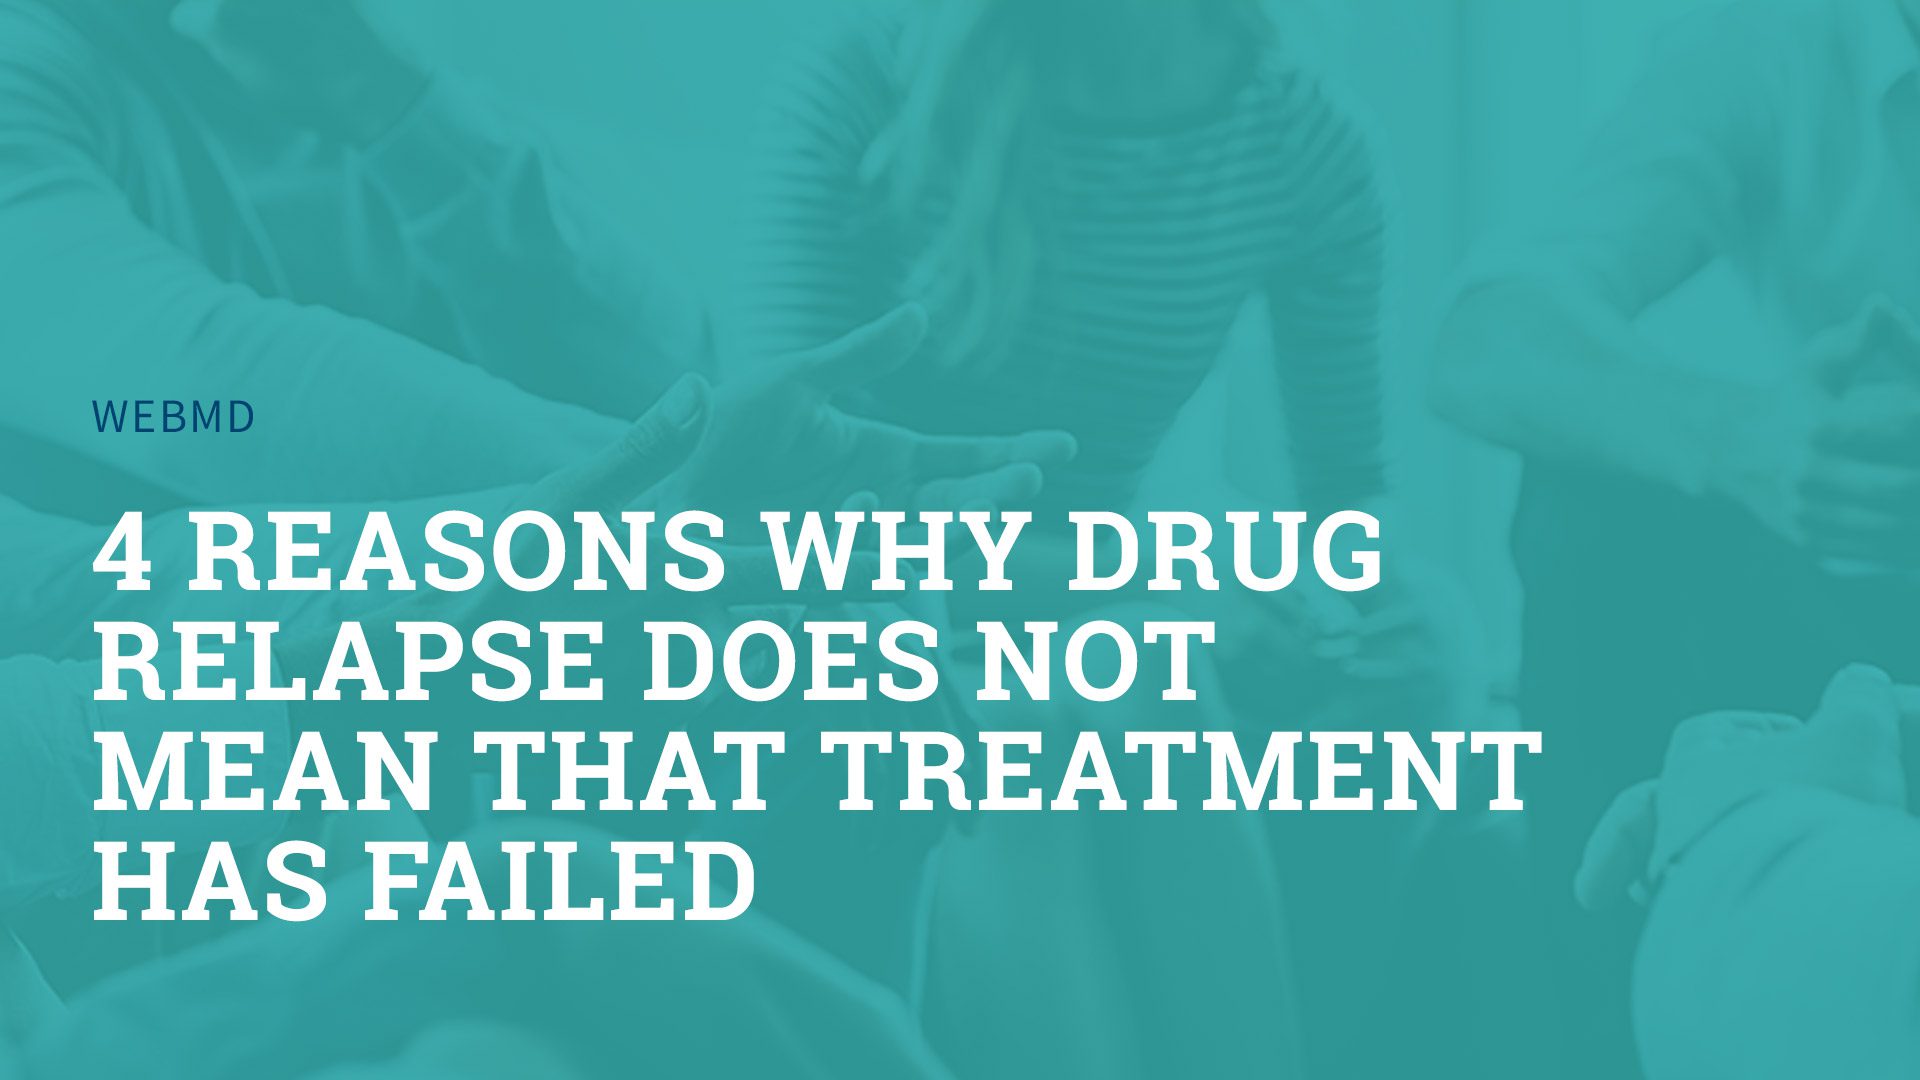 4 Reasons Why Drug Relapse Does Not Mean That Treatment Has Failed